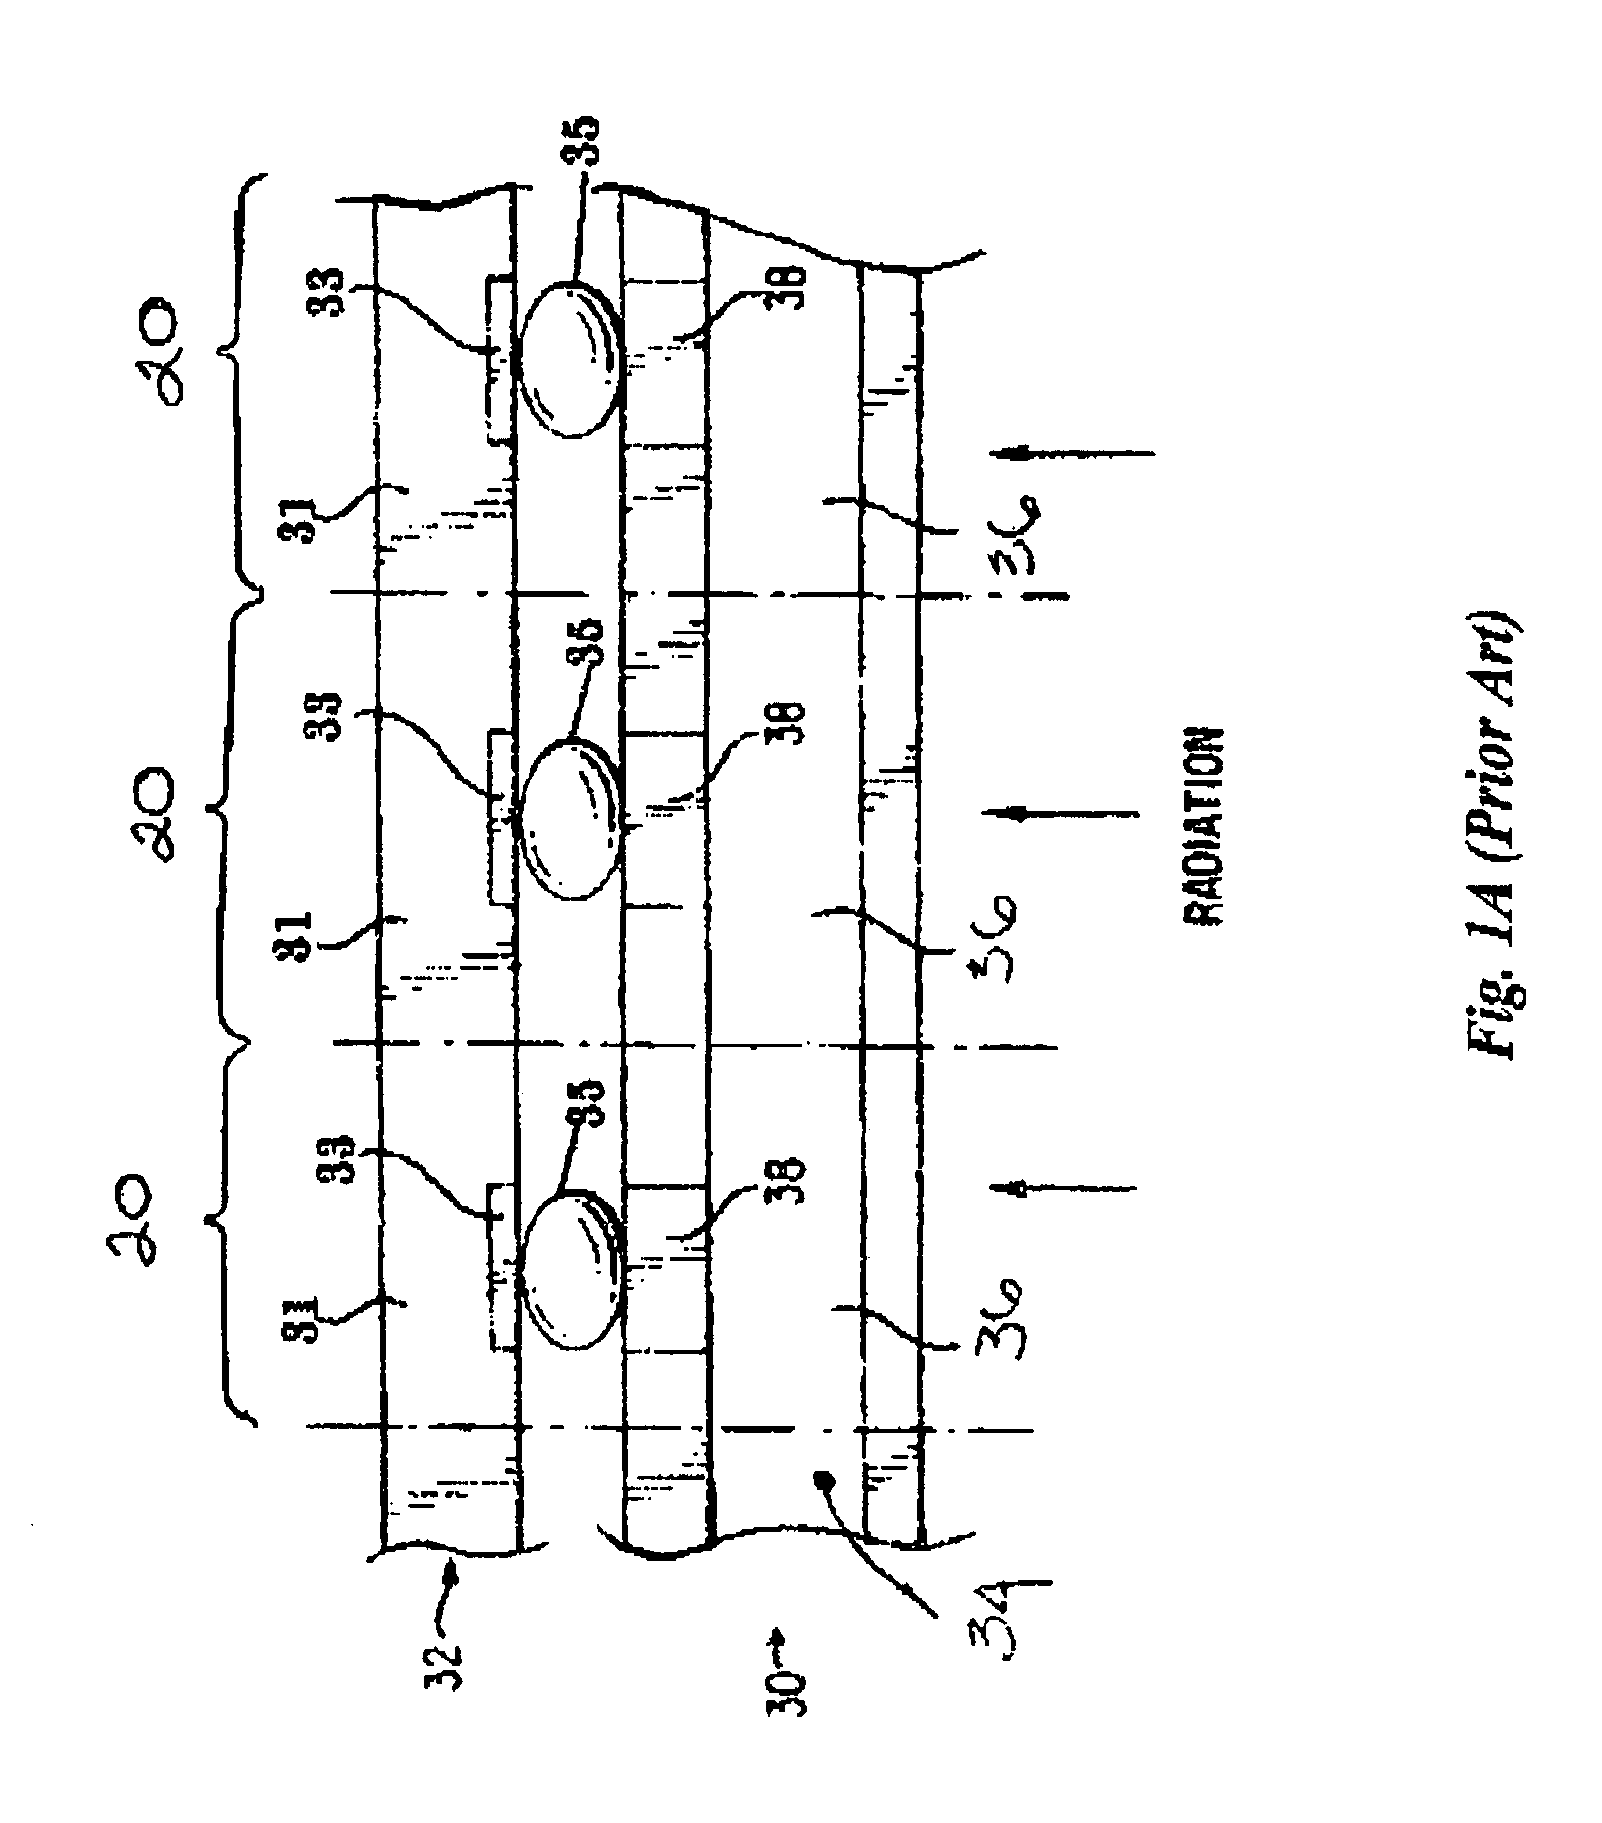 Ganged detector pixel, photon/pulse counting radiation imaging device